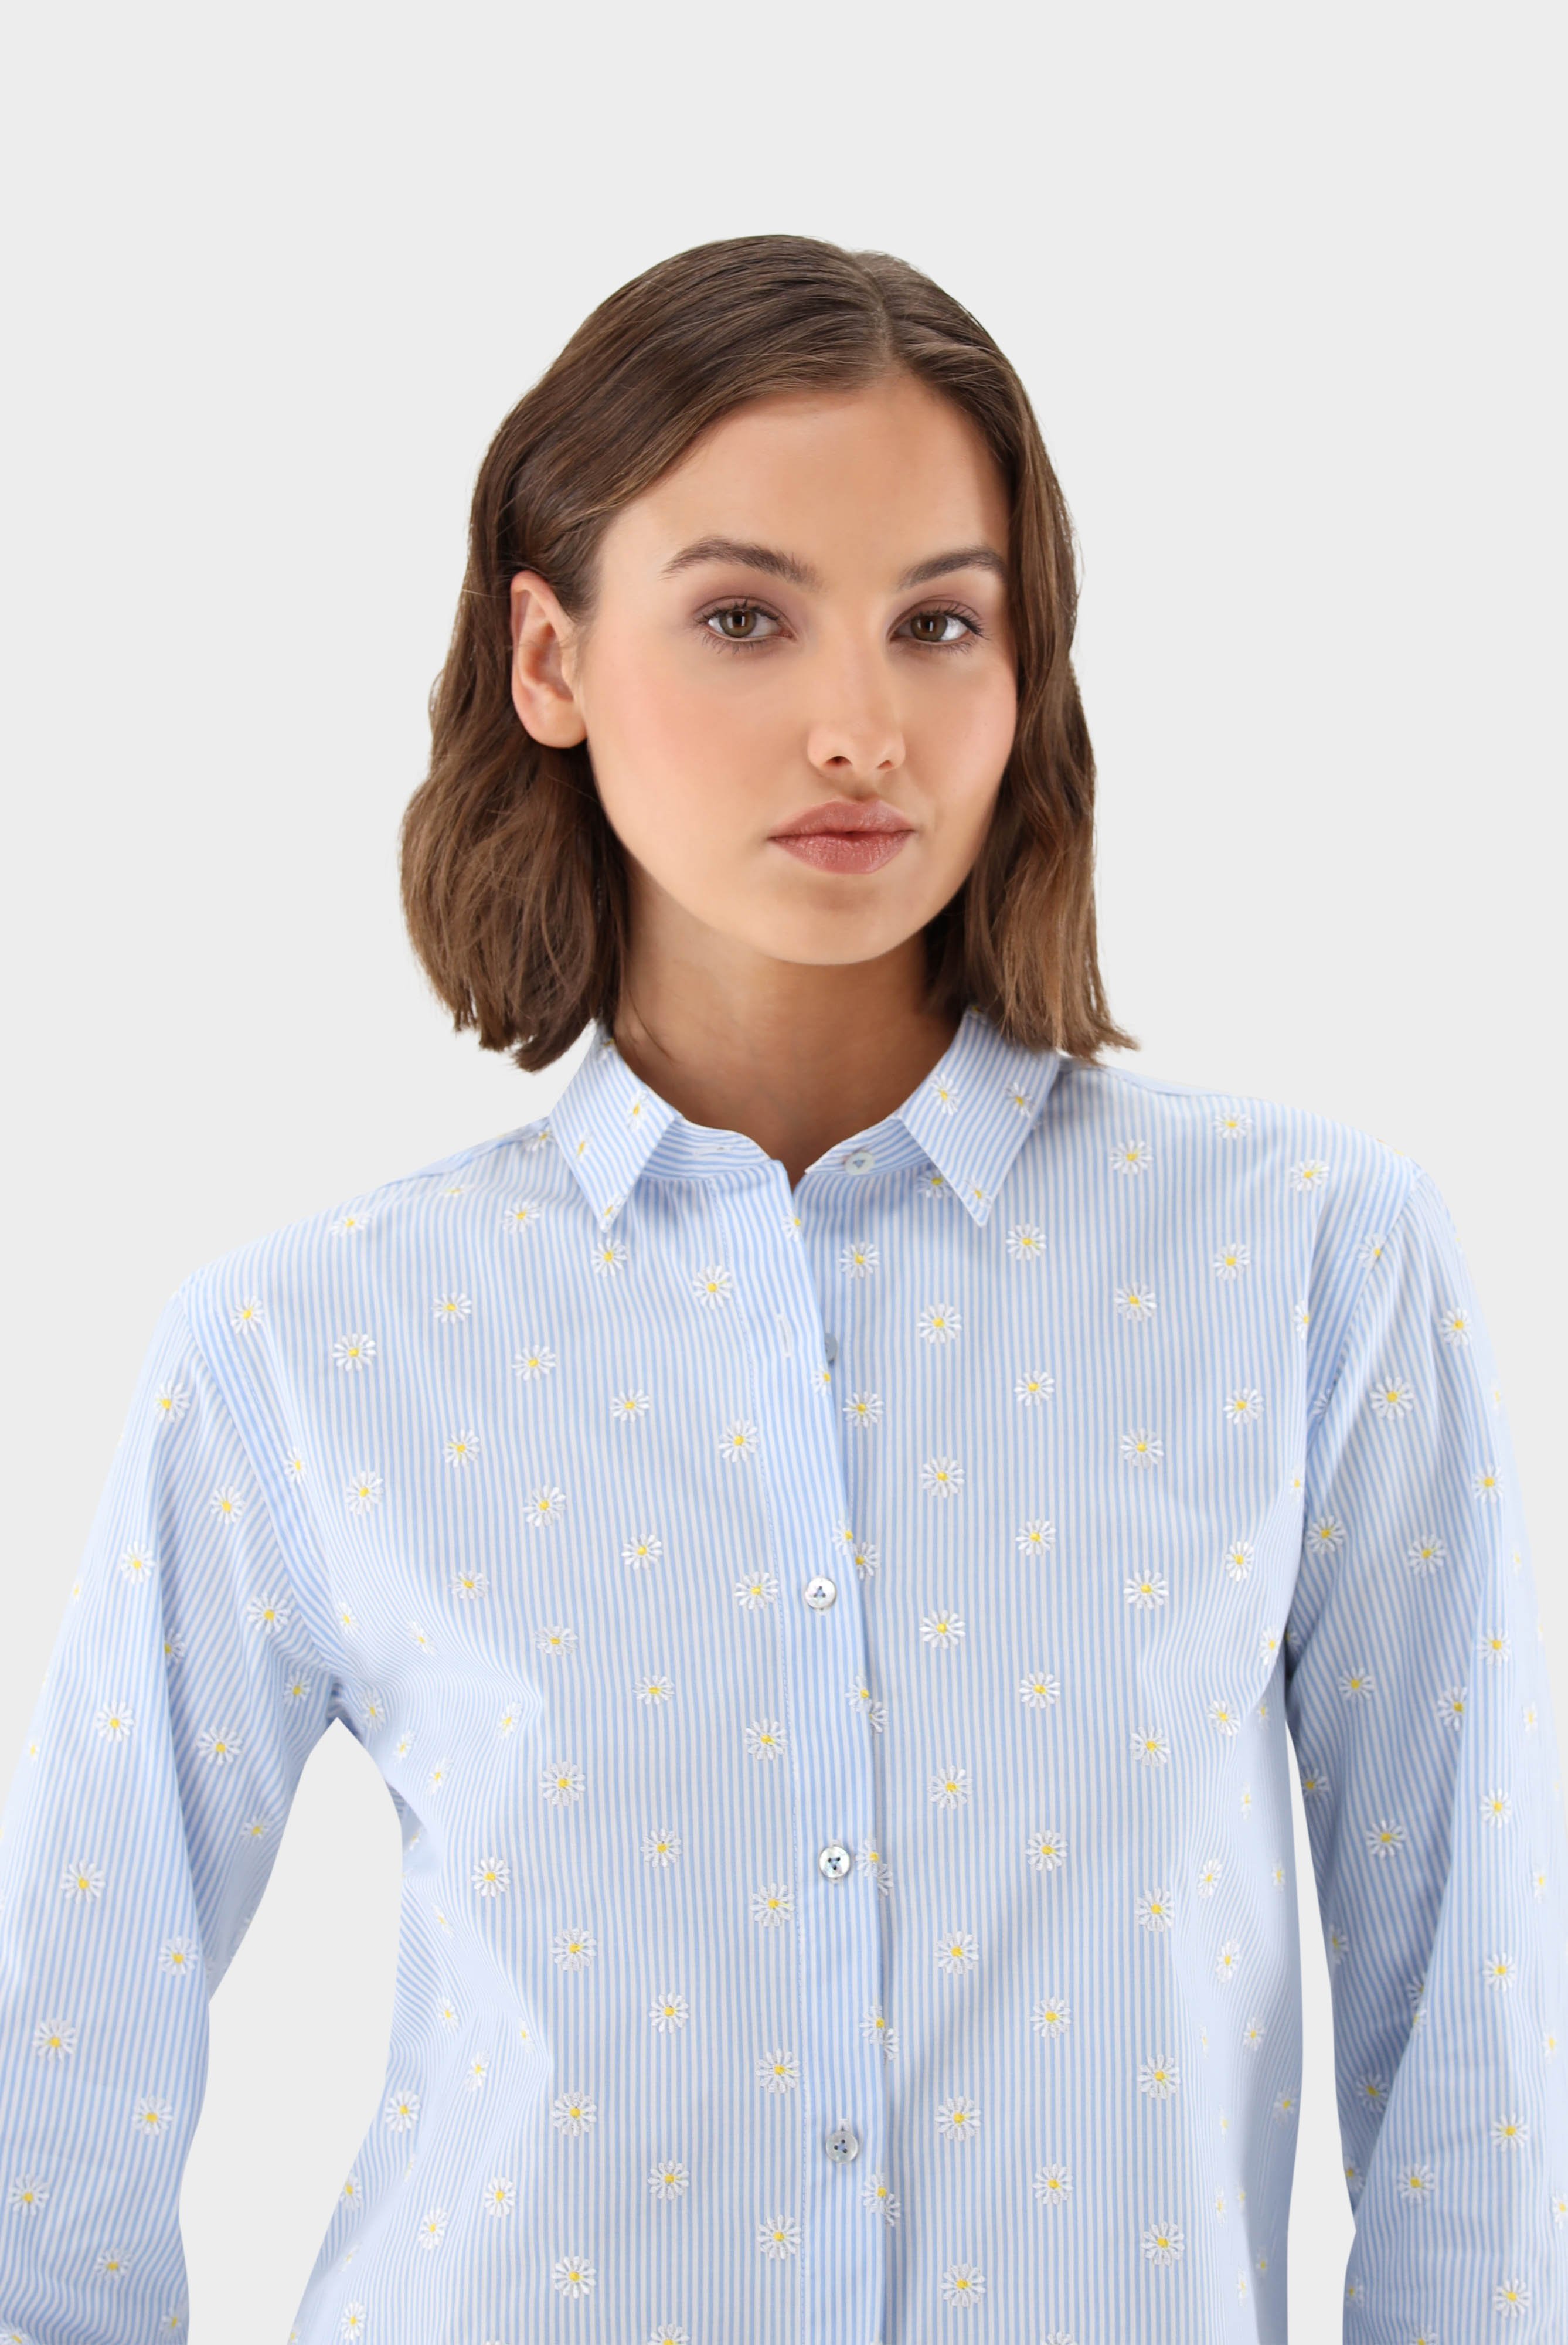 Casual Blouses+Striped shirt blouse with floral embroidery+05.528R.FU.151316.730.32